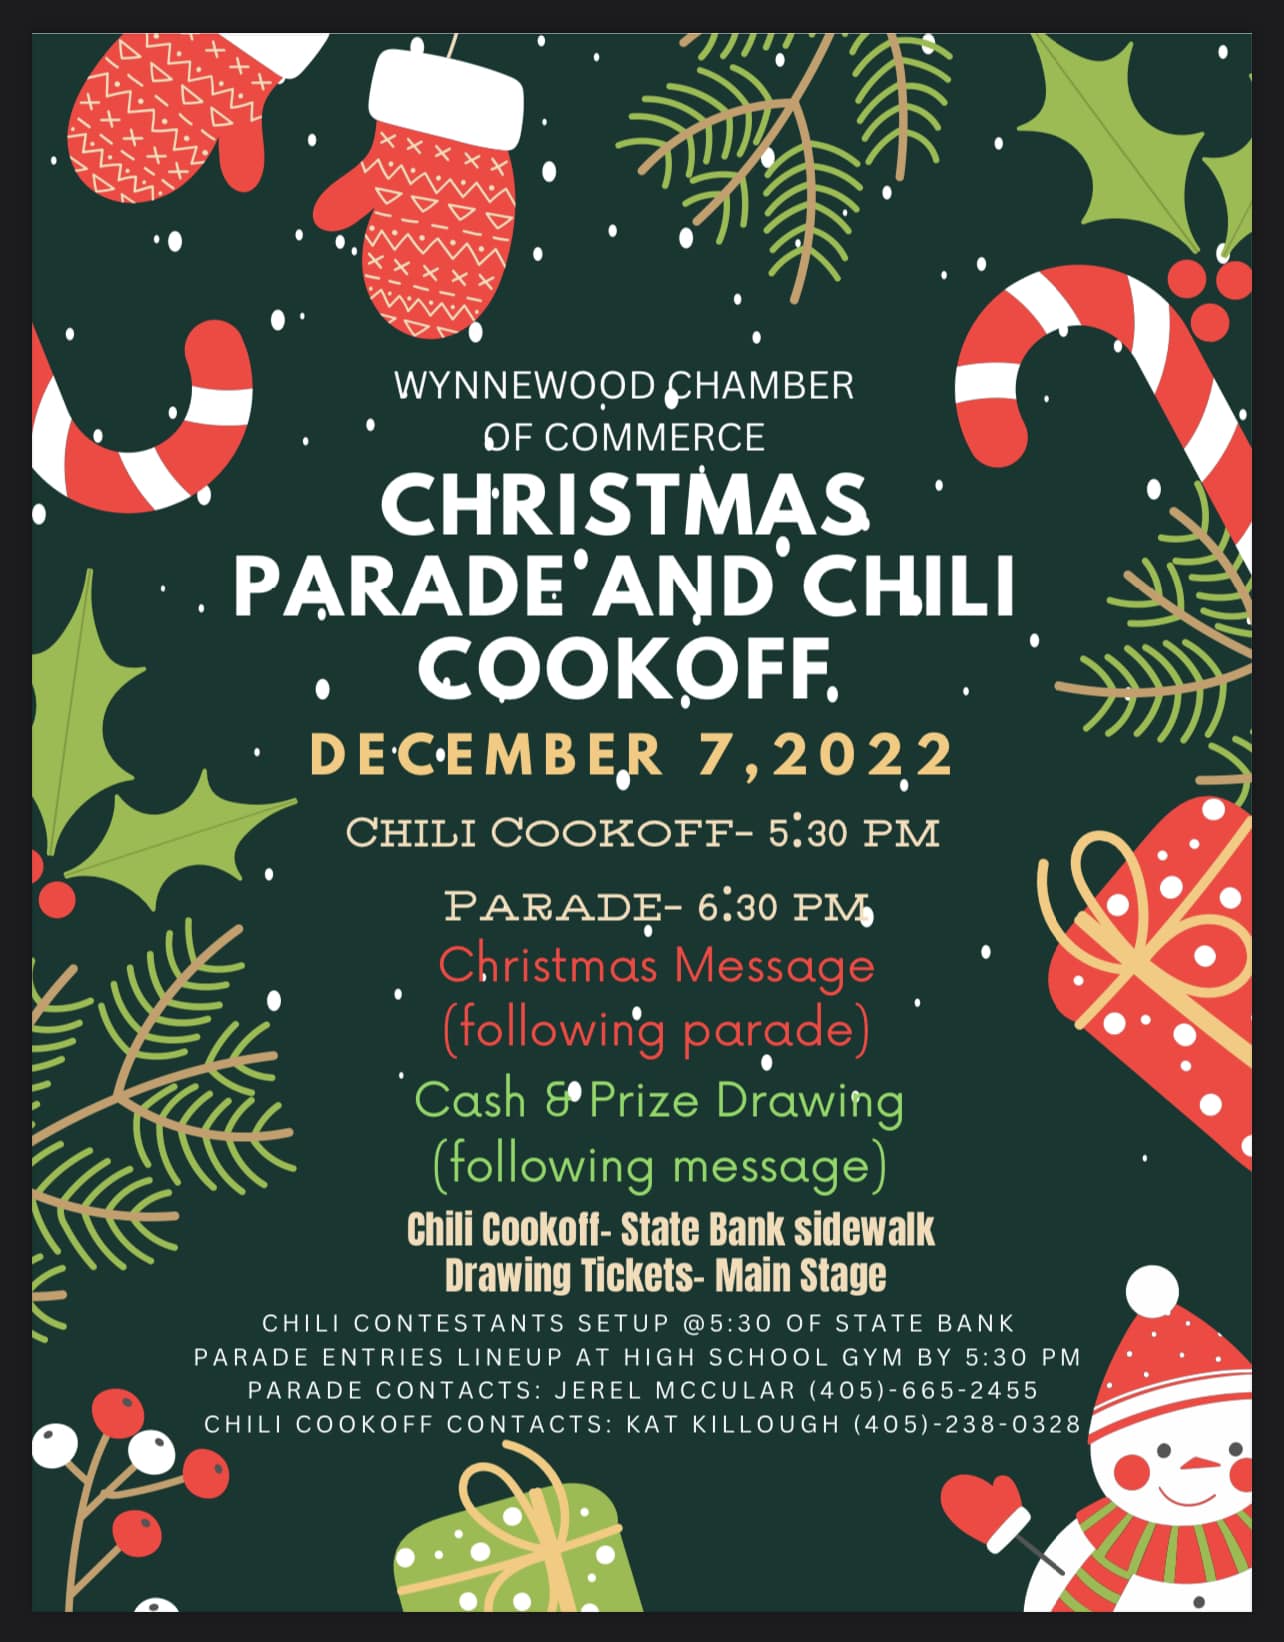 a colorful Christmas flyer with the following message: Wynnewood Chamber of Commerce Christmas Parade and Chili Cookoff. December 7, 2022. Chili Cook - 5:30 PM. Parade - 6:30 PM. Christmas message following parade. Cash & Prize drawing following message. Chilli cookoff - State Bank sidewalk. Drawing tickets - main stage. Chili contestants sign up at 5:30 at state bank. Parade Entries line up at highschool guy by 5:30 PM. Parade contacts: jerel mccular 405-665-2455. Chili cookoff contact: Kat killough 405-238-0328.